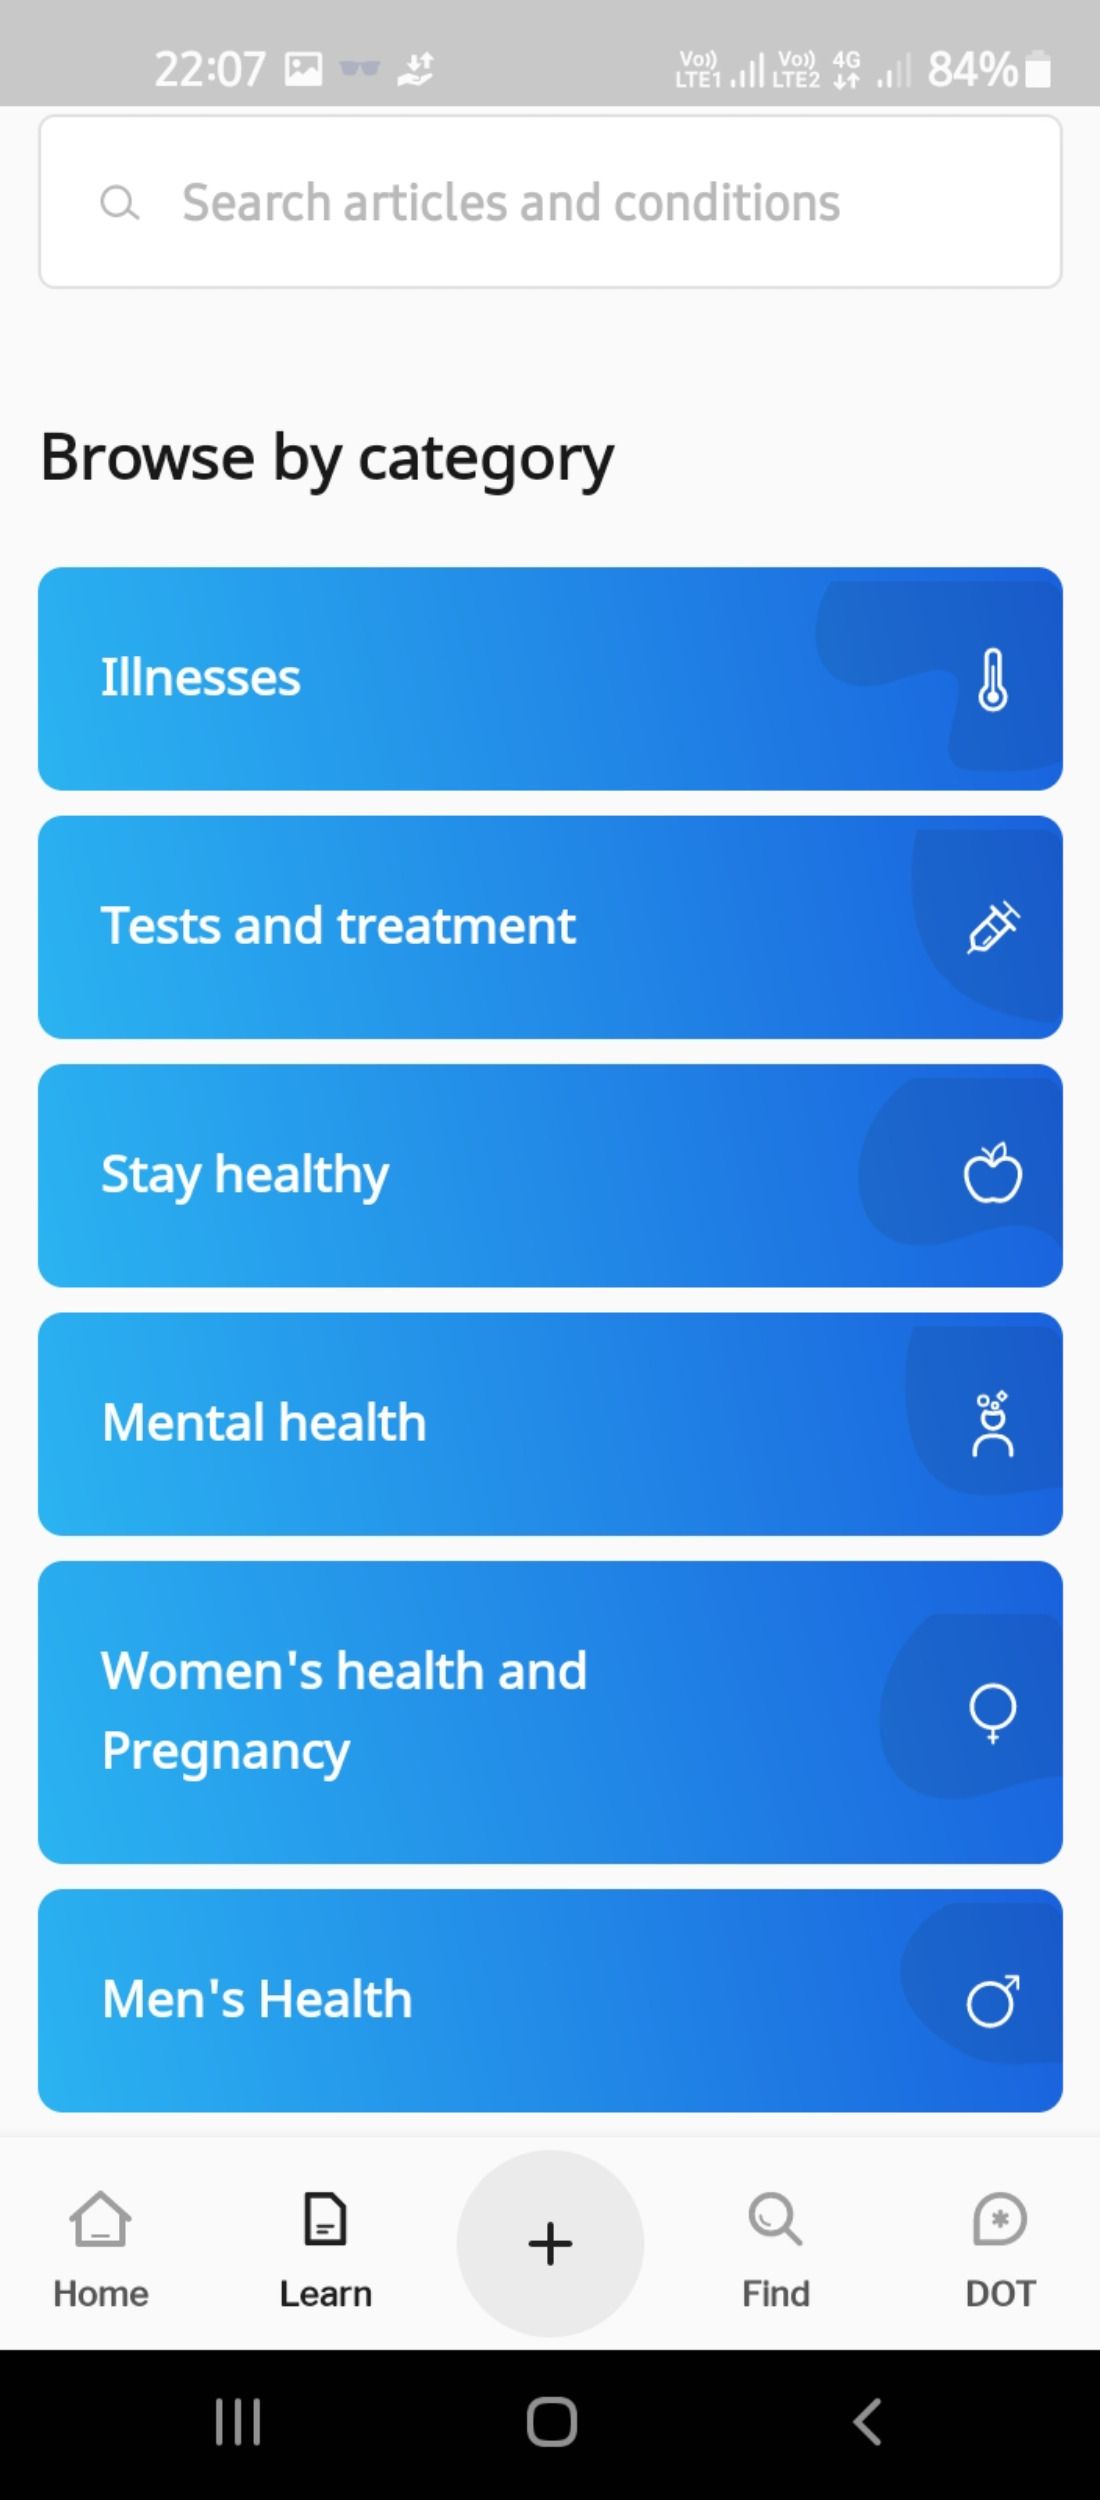 Clinical grade information and resources in the Healthily app